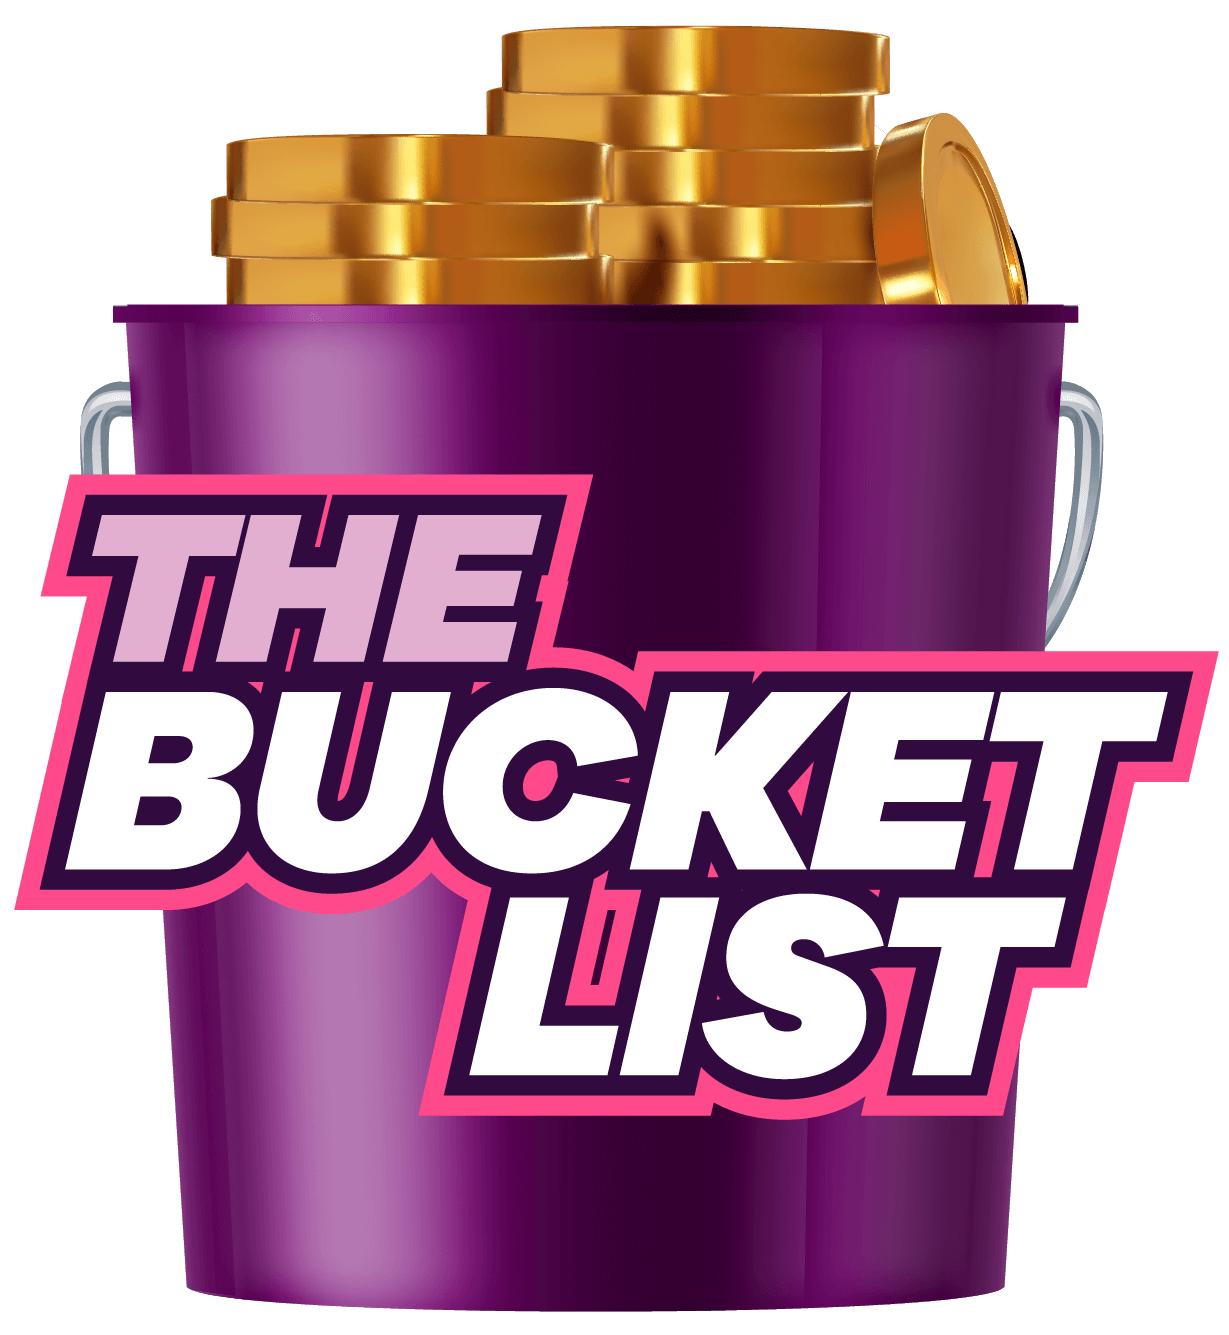 A purple bucket full of gold coins with the text The Bucket List